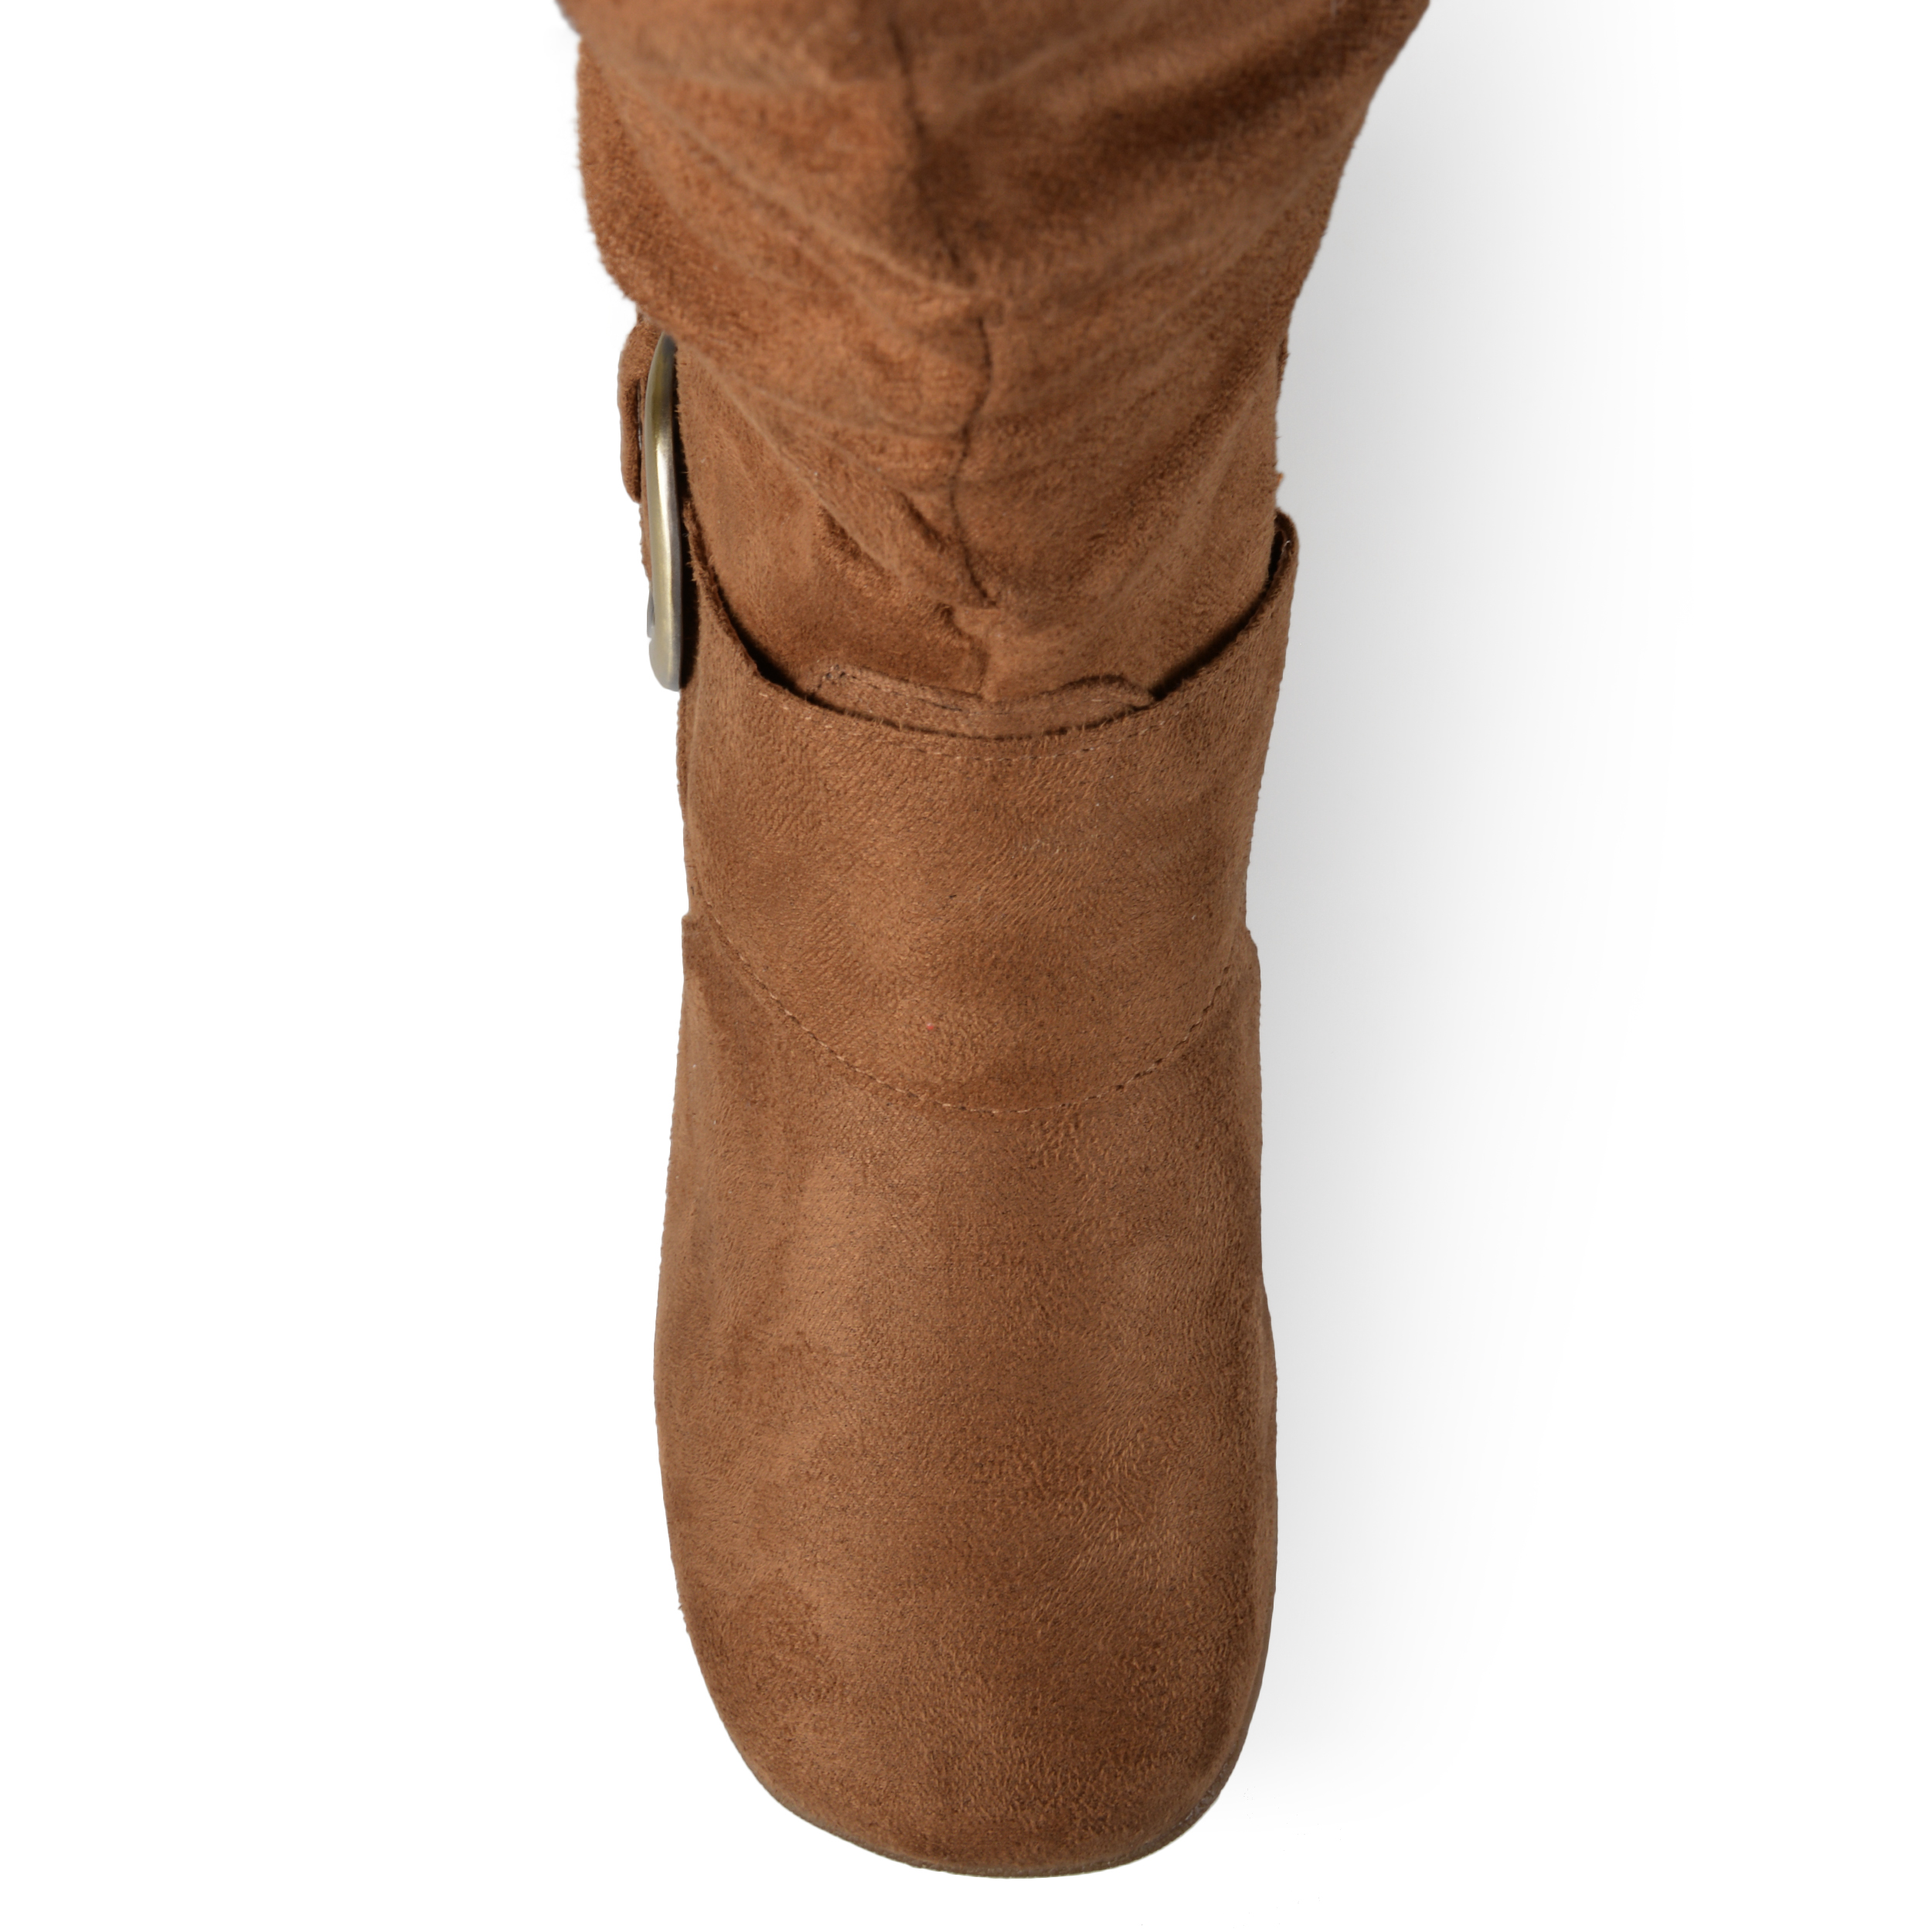 Women's Wide-Calf Buckle Knee-High Slouch Microsuede Boot - image 5 of 8